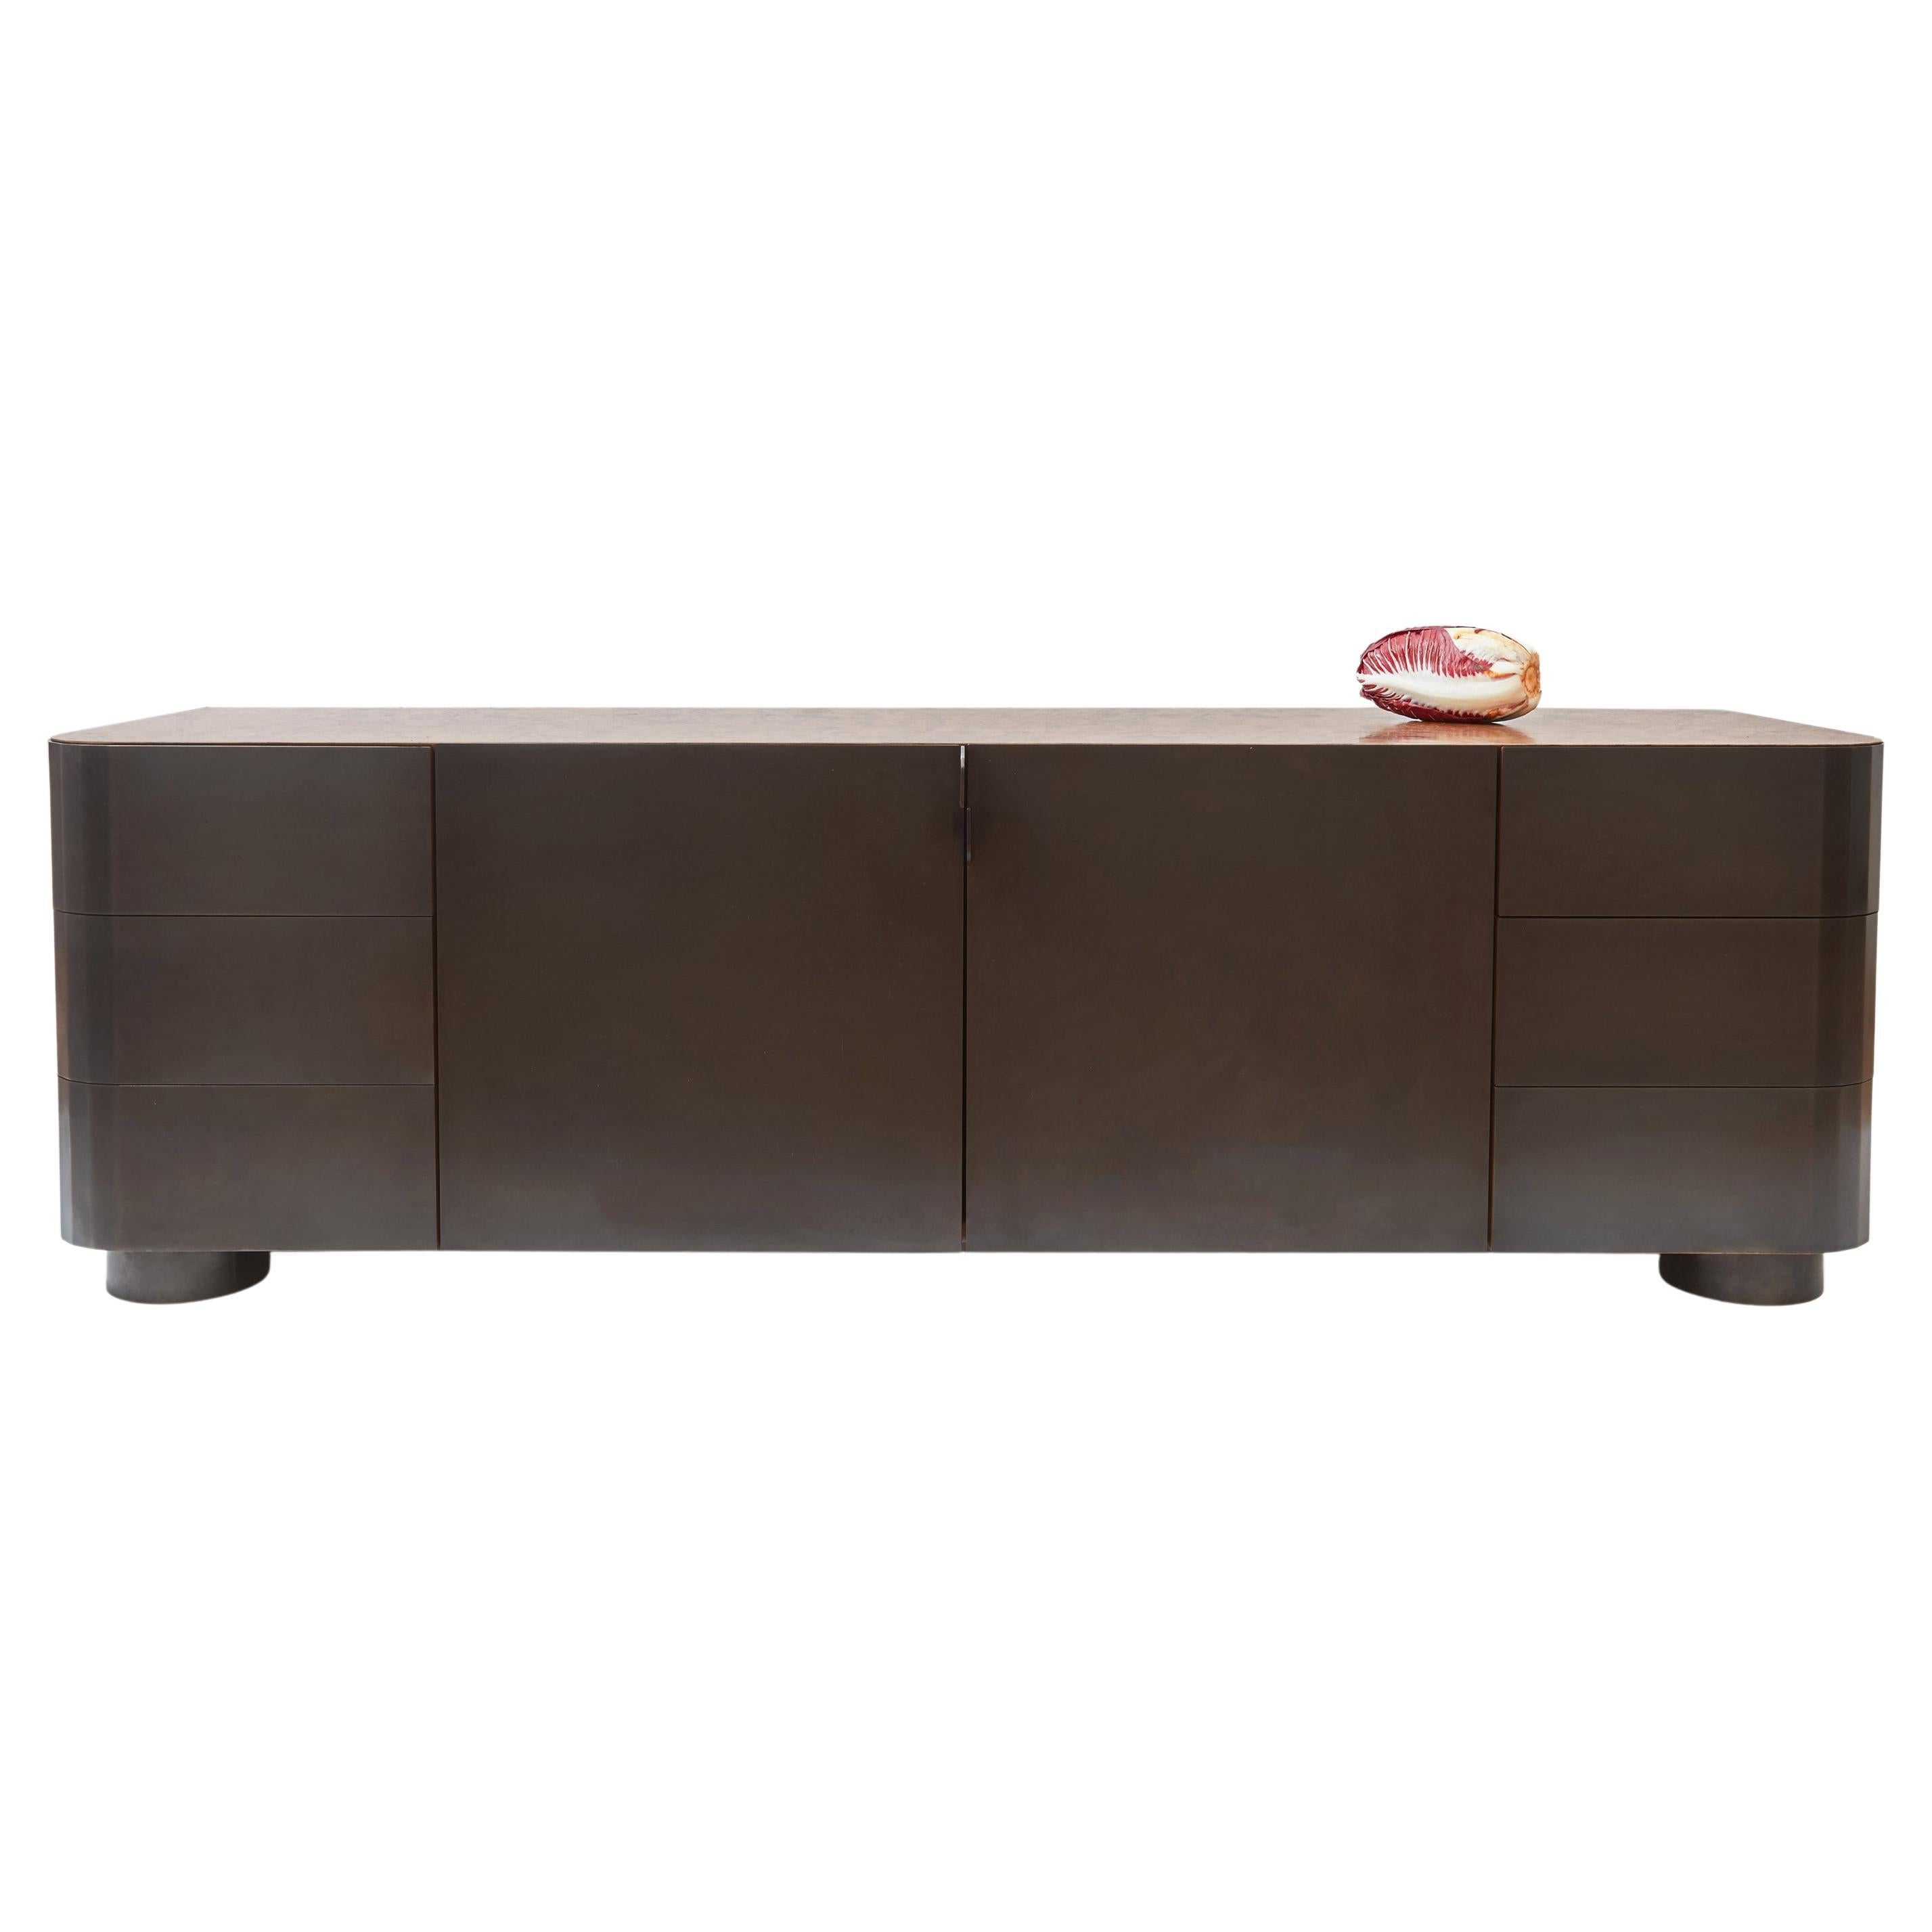 Monolithic Credenza / Sideboard from Black patinated Brass & Burl Walnut Wood For Sale